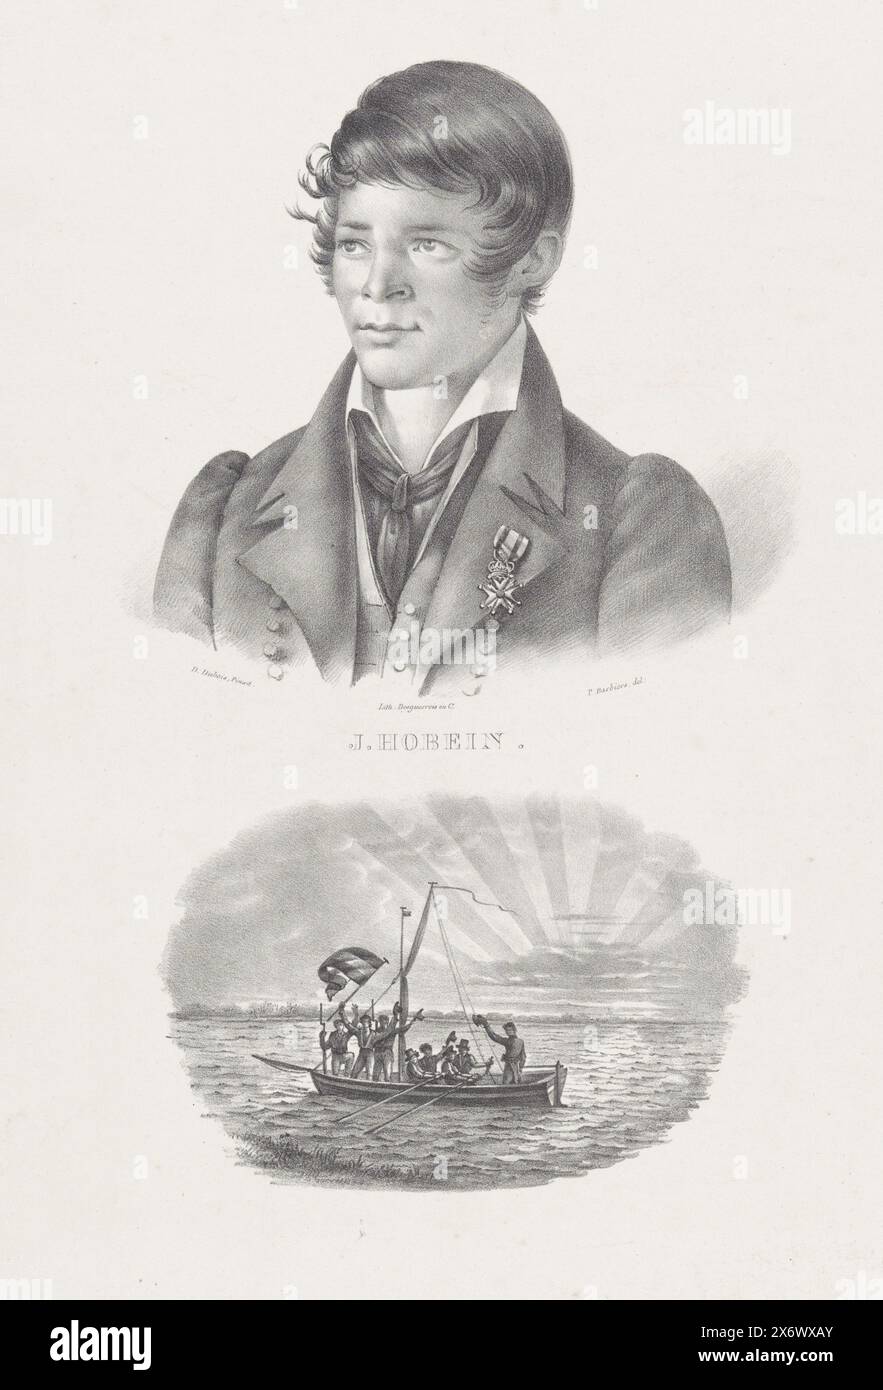 Heroic act of Jacob Hobein, 1831, J. Hobein (title on object), Portrait of the sailor Jacob Hobein with the Military Order of William (awarded on April 8, 1832), at the bottom the safe return of the sloop with the Dutch flag captured under heavy Belgian fire at Fort Philippine on the Scheldt, March 19, 1831., print, print maker: Pieter Barbiers (IV), (mentioned on object), after painting by: D. Dubois, (mentioned on object), printer: Desguerrois & Co., (mentioned on object), print maker: Netherlands, printer: Amsterdam, 1832, paper, height, 379 mm × width, 267 mm Stock Photo